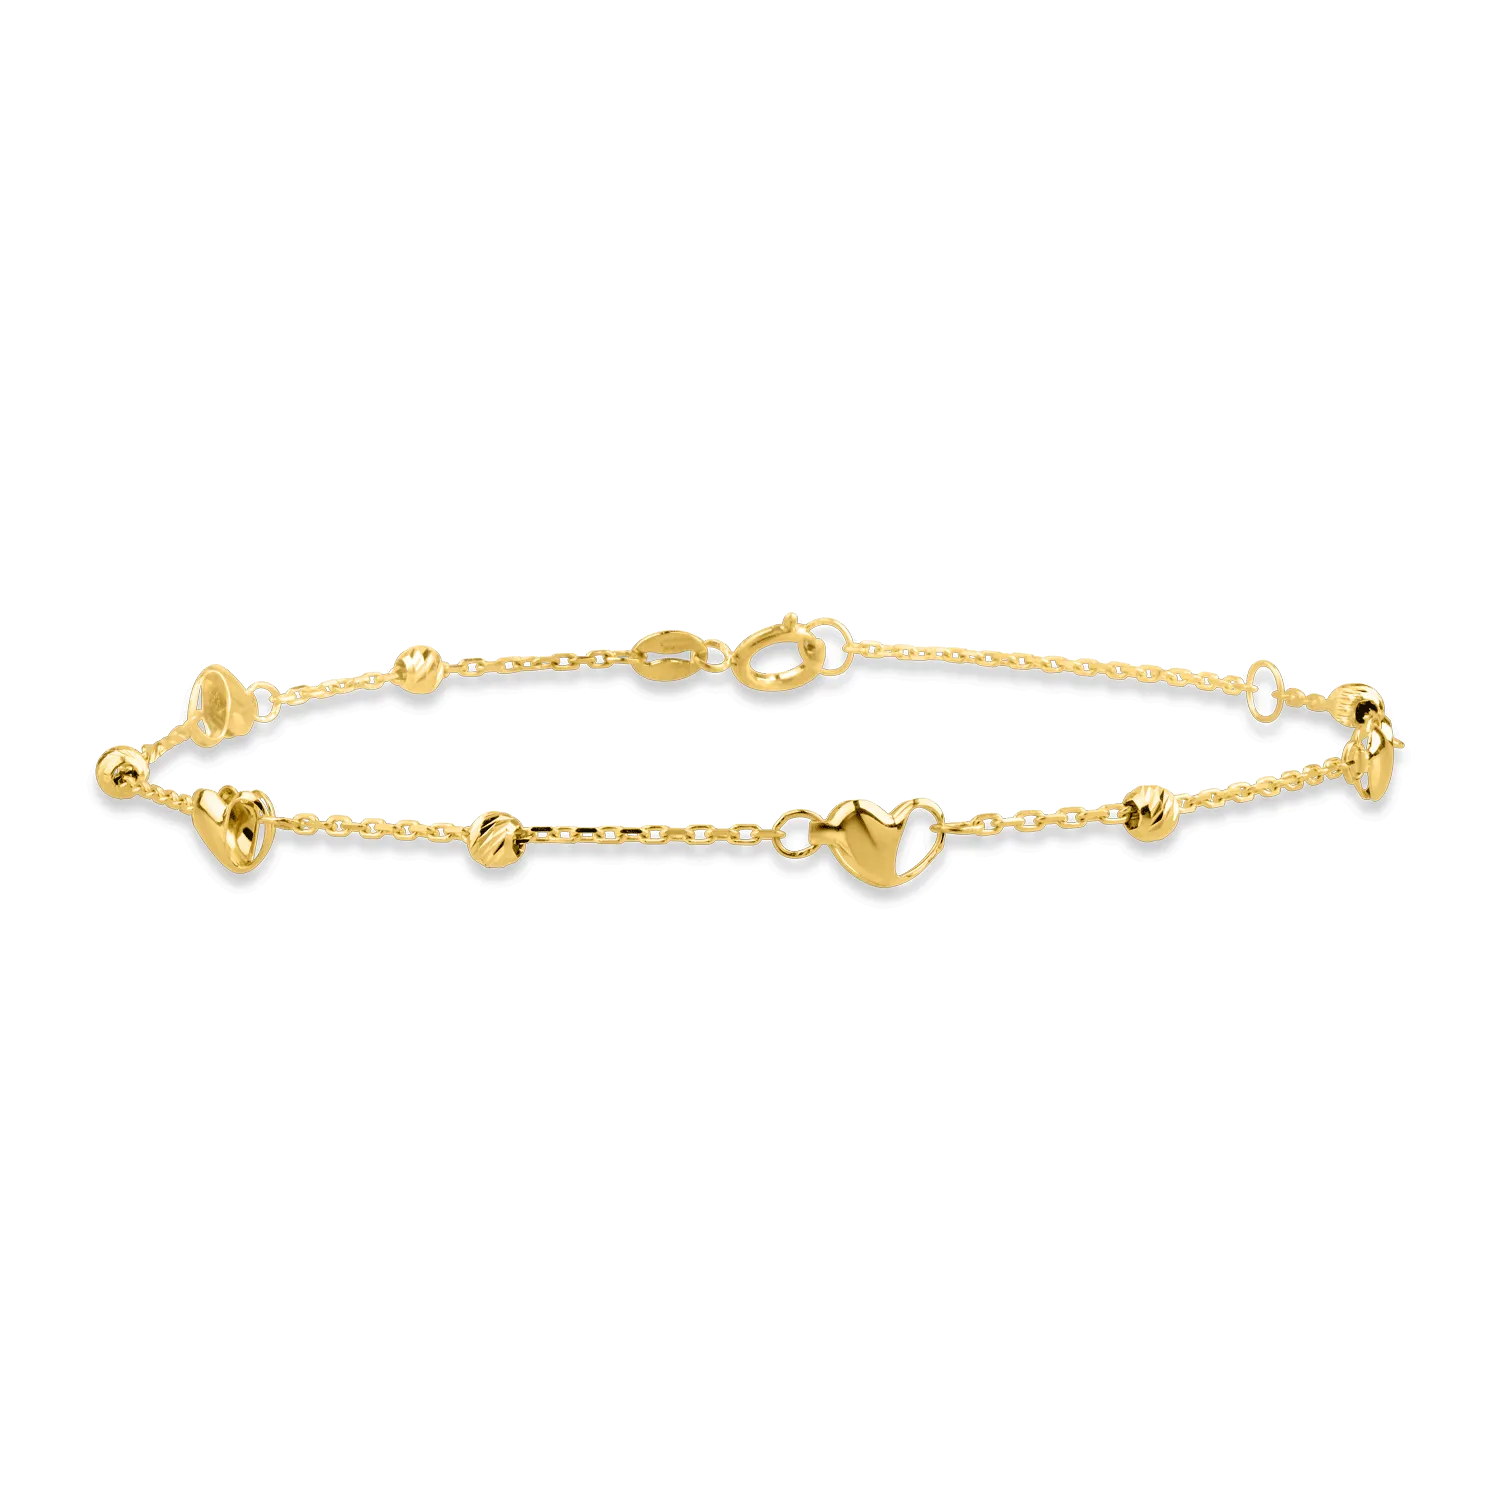 Yellow gold bracelet with beads and hearts